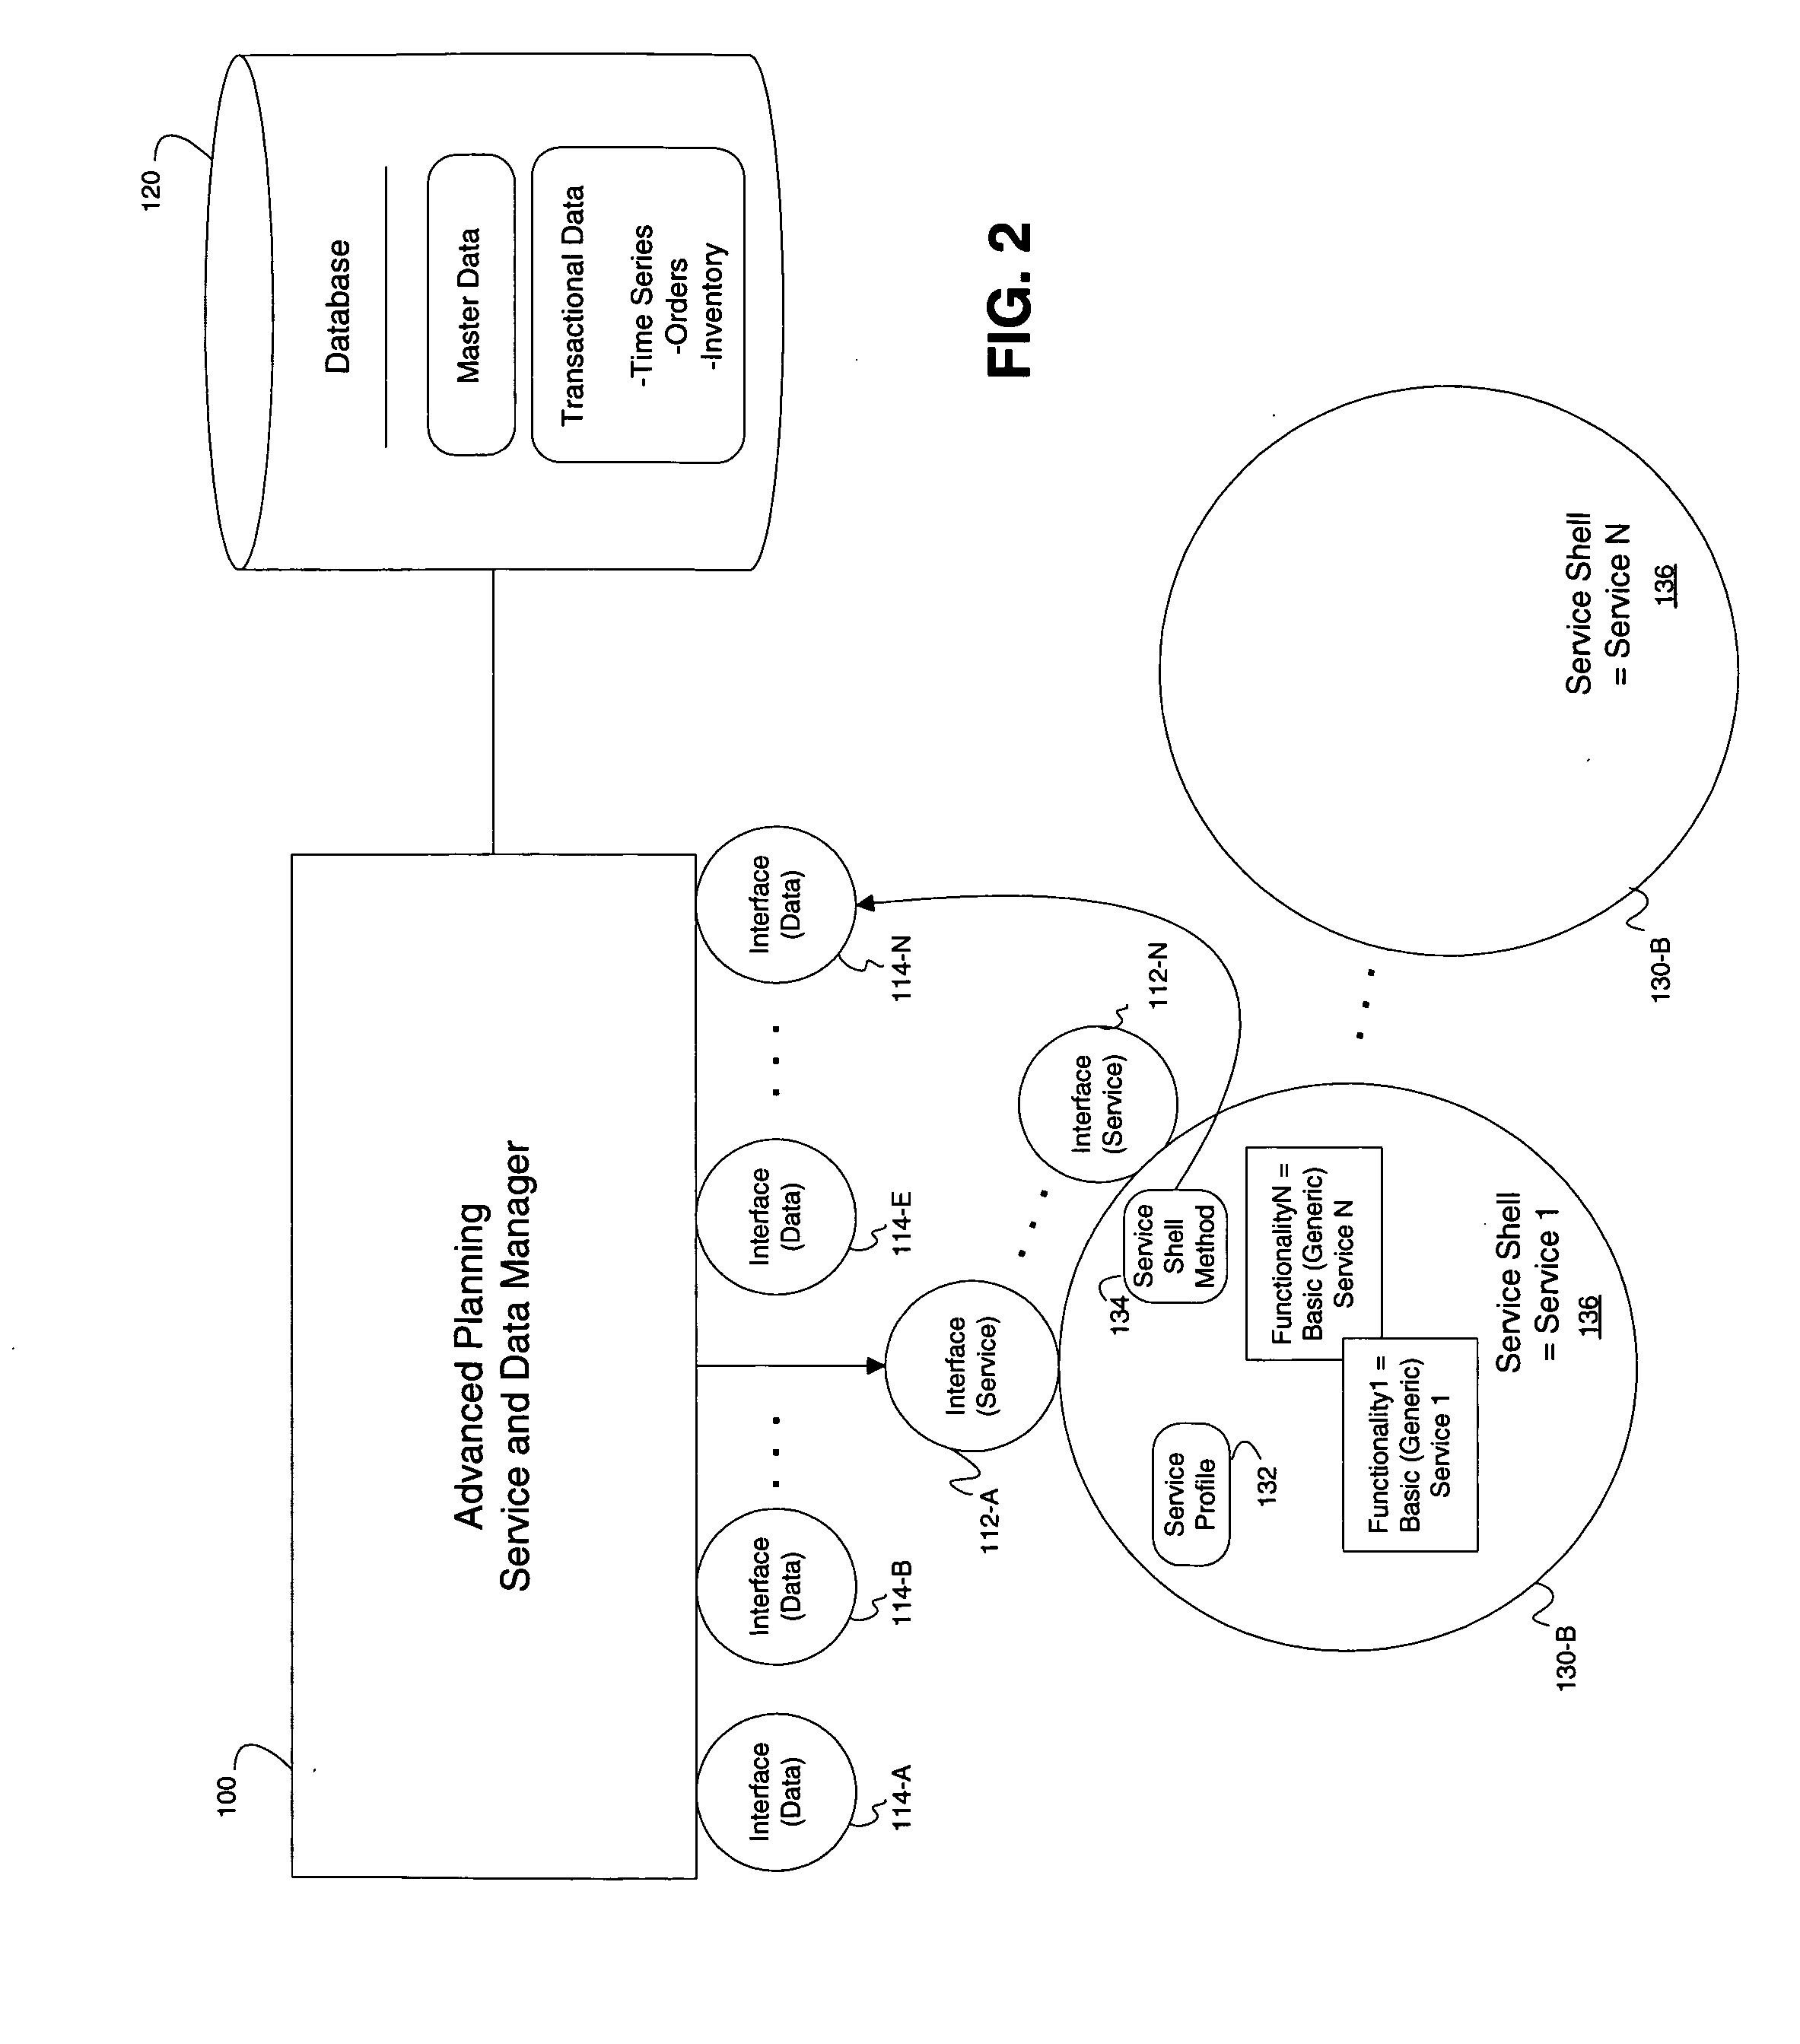 Systems and methods for managing the execution of services